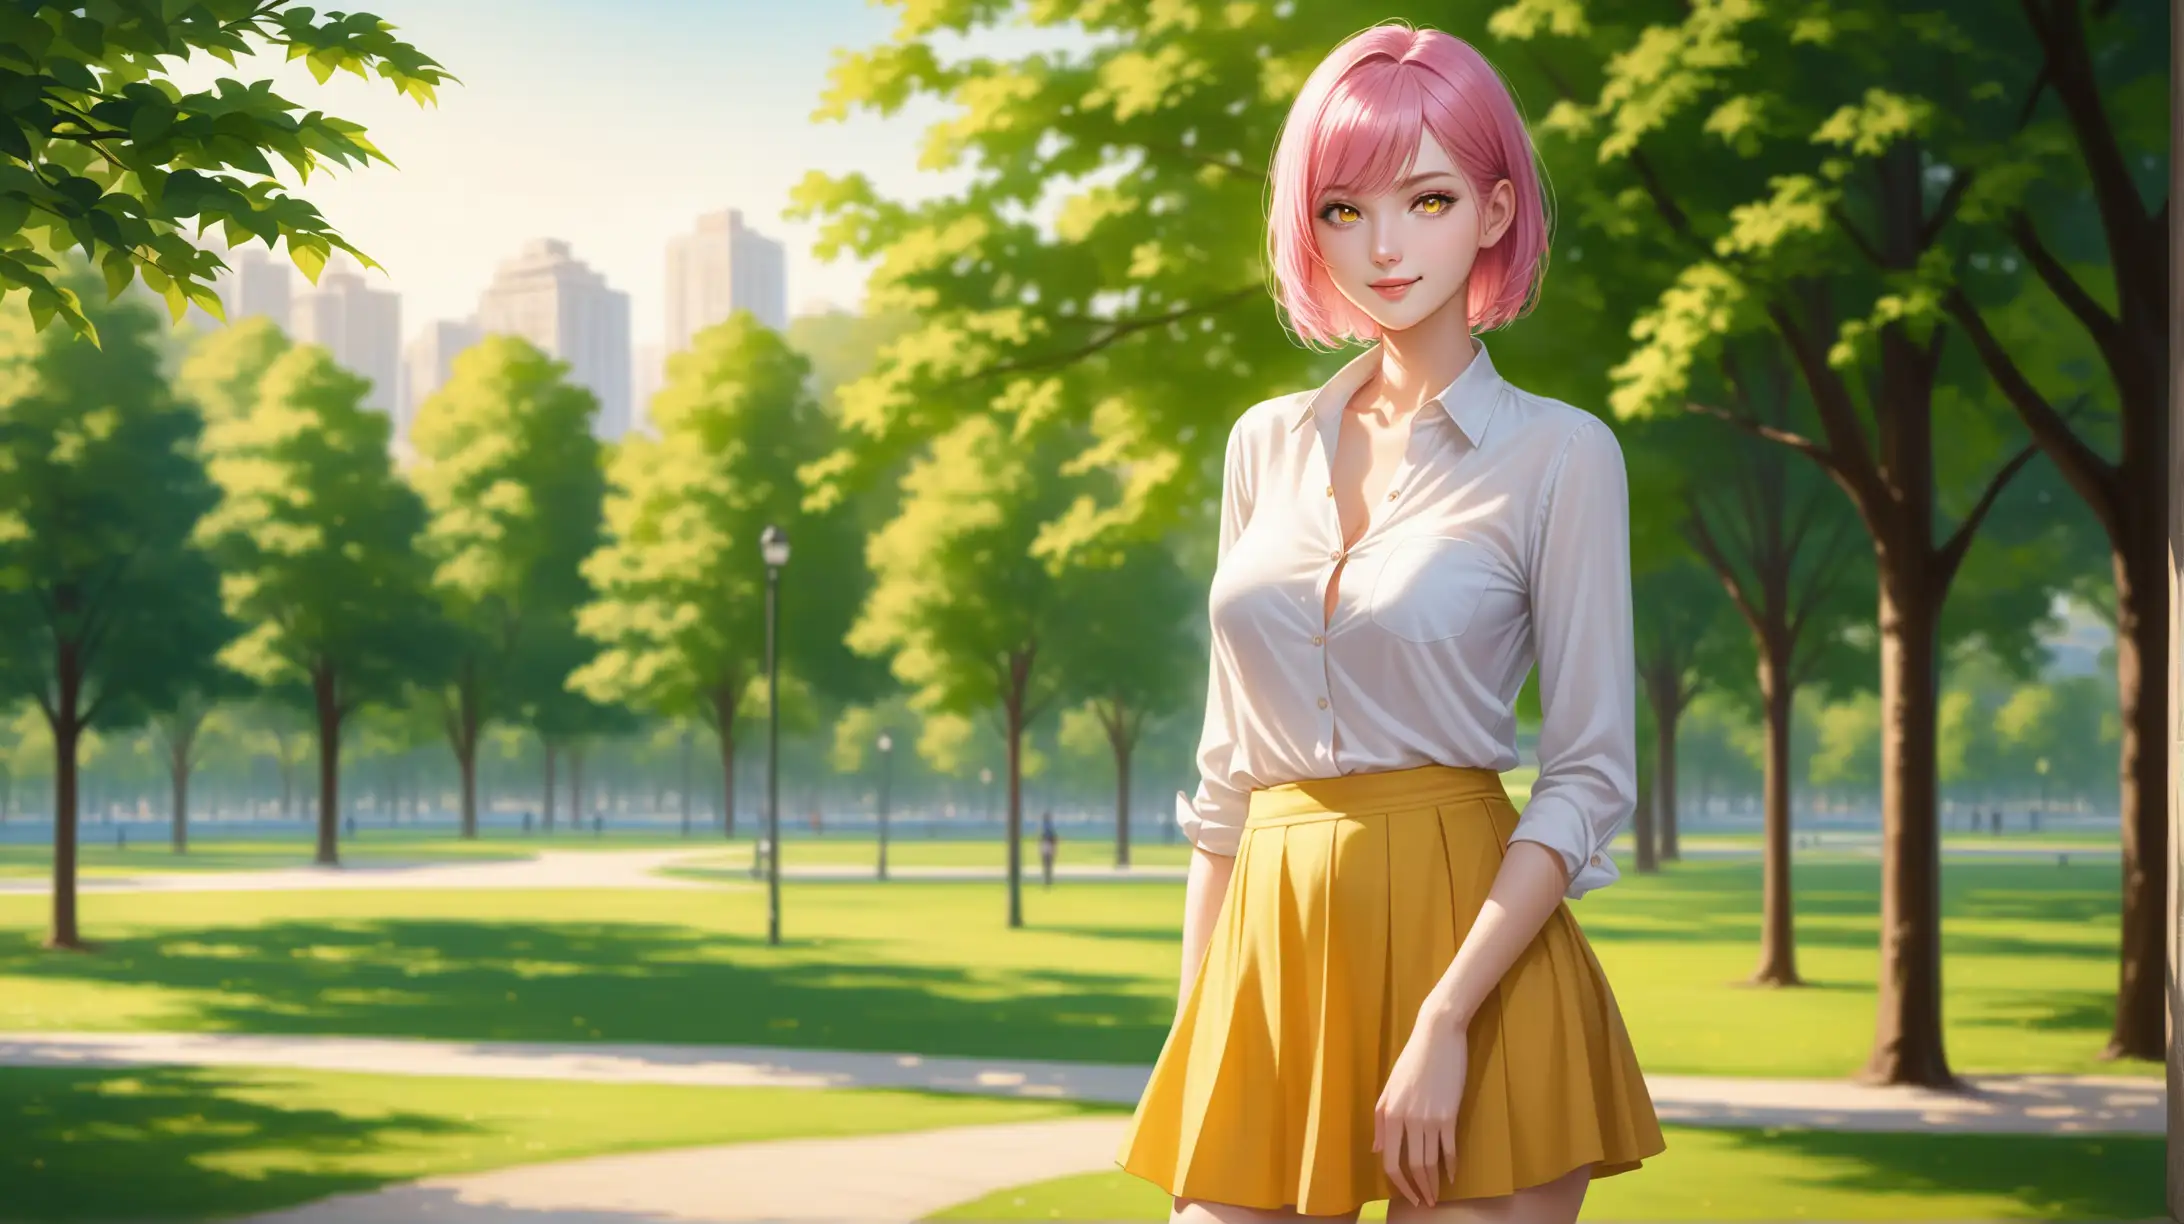 Seductive Woman with Pink Hair in Yellow Skirt at Park